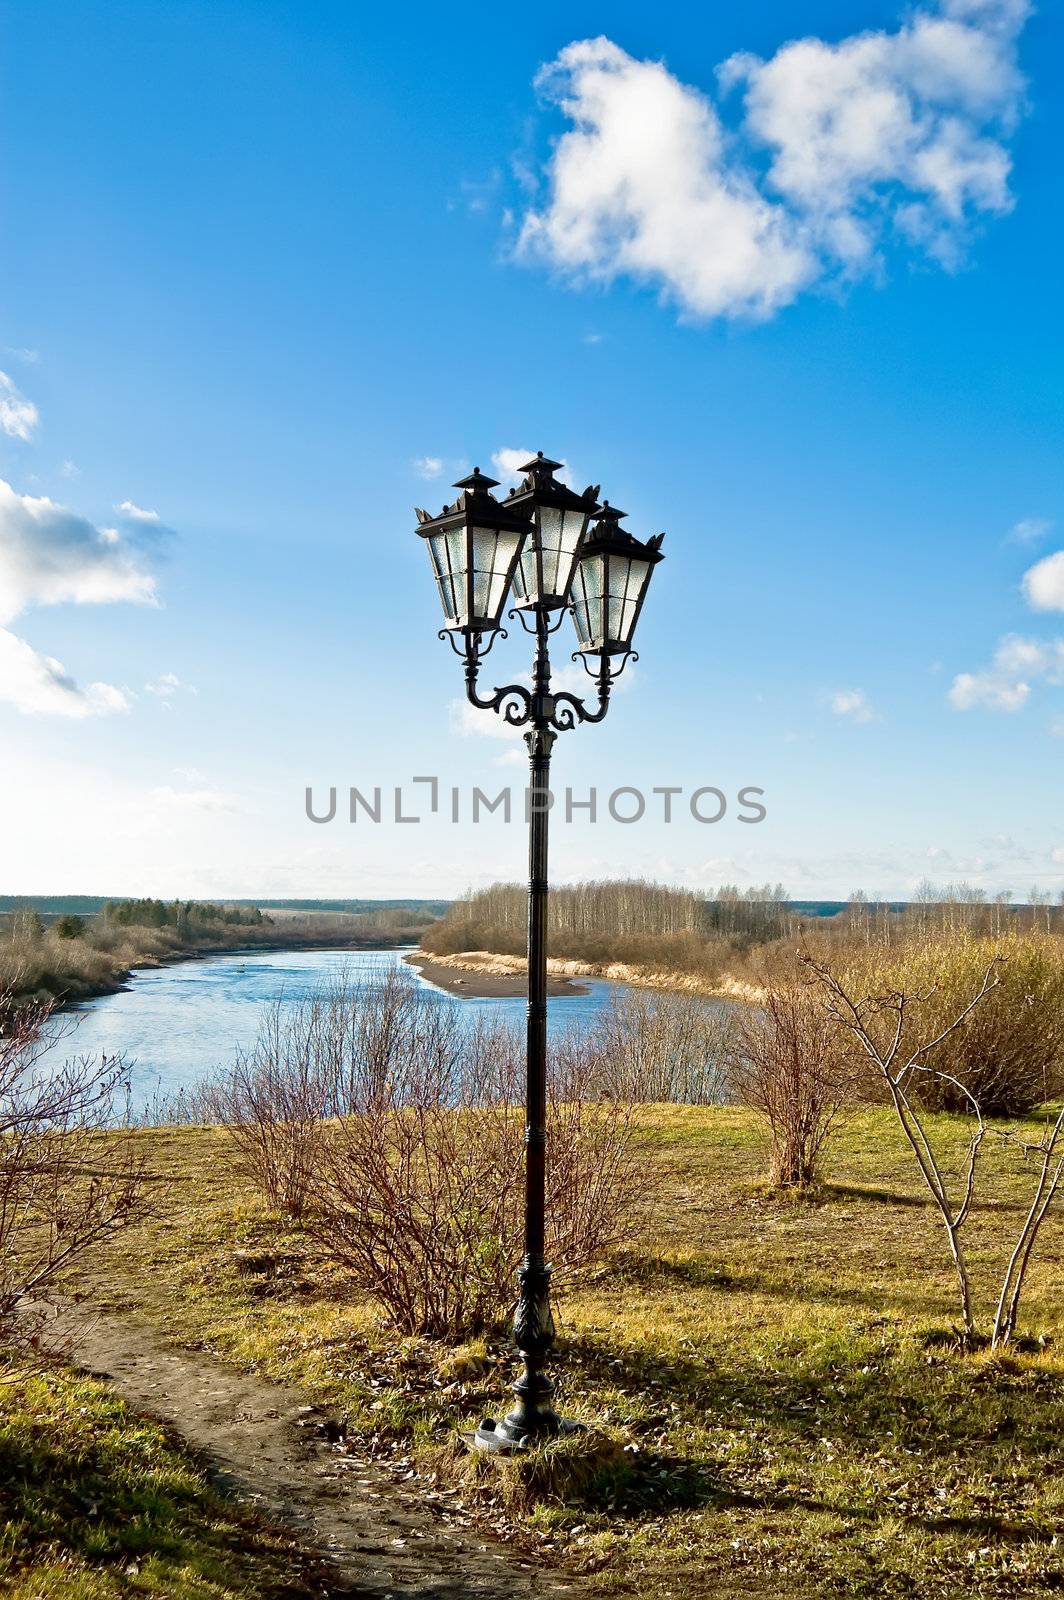 Black decorative lamp with three shades against the blue sky with clouds, paths, grass, bushes, trees and rivers